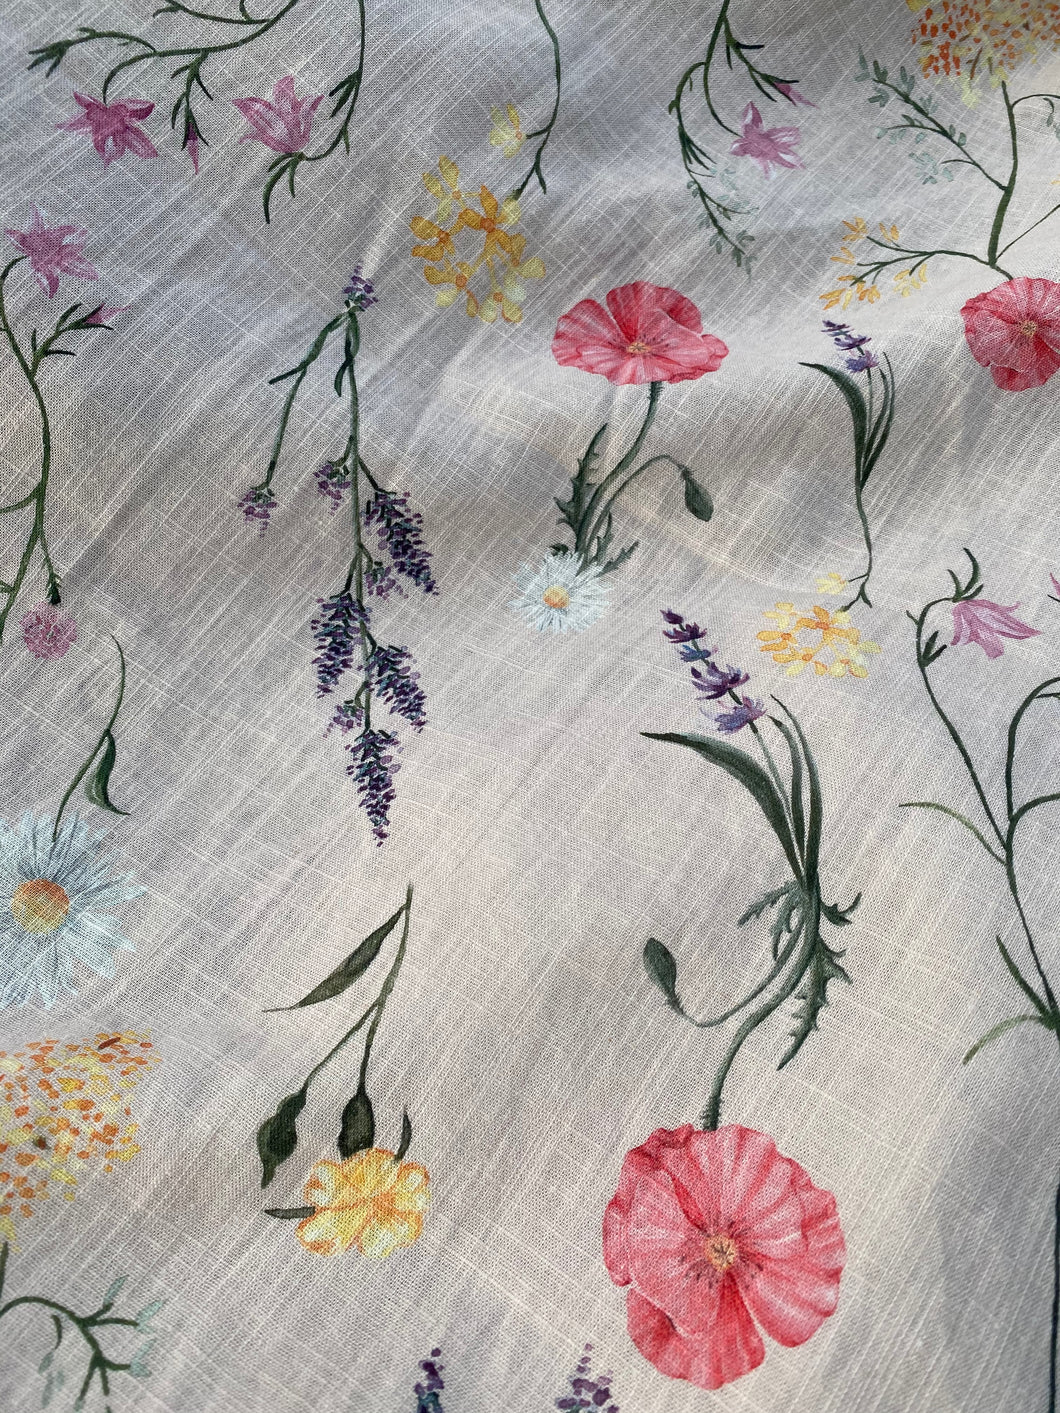 Wildflower and Lavender linen blend tablecloth 50x72